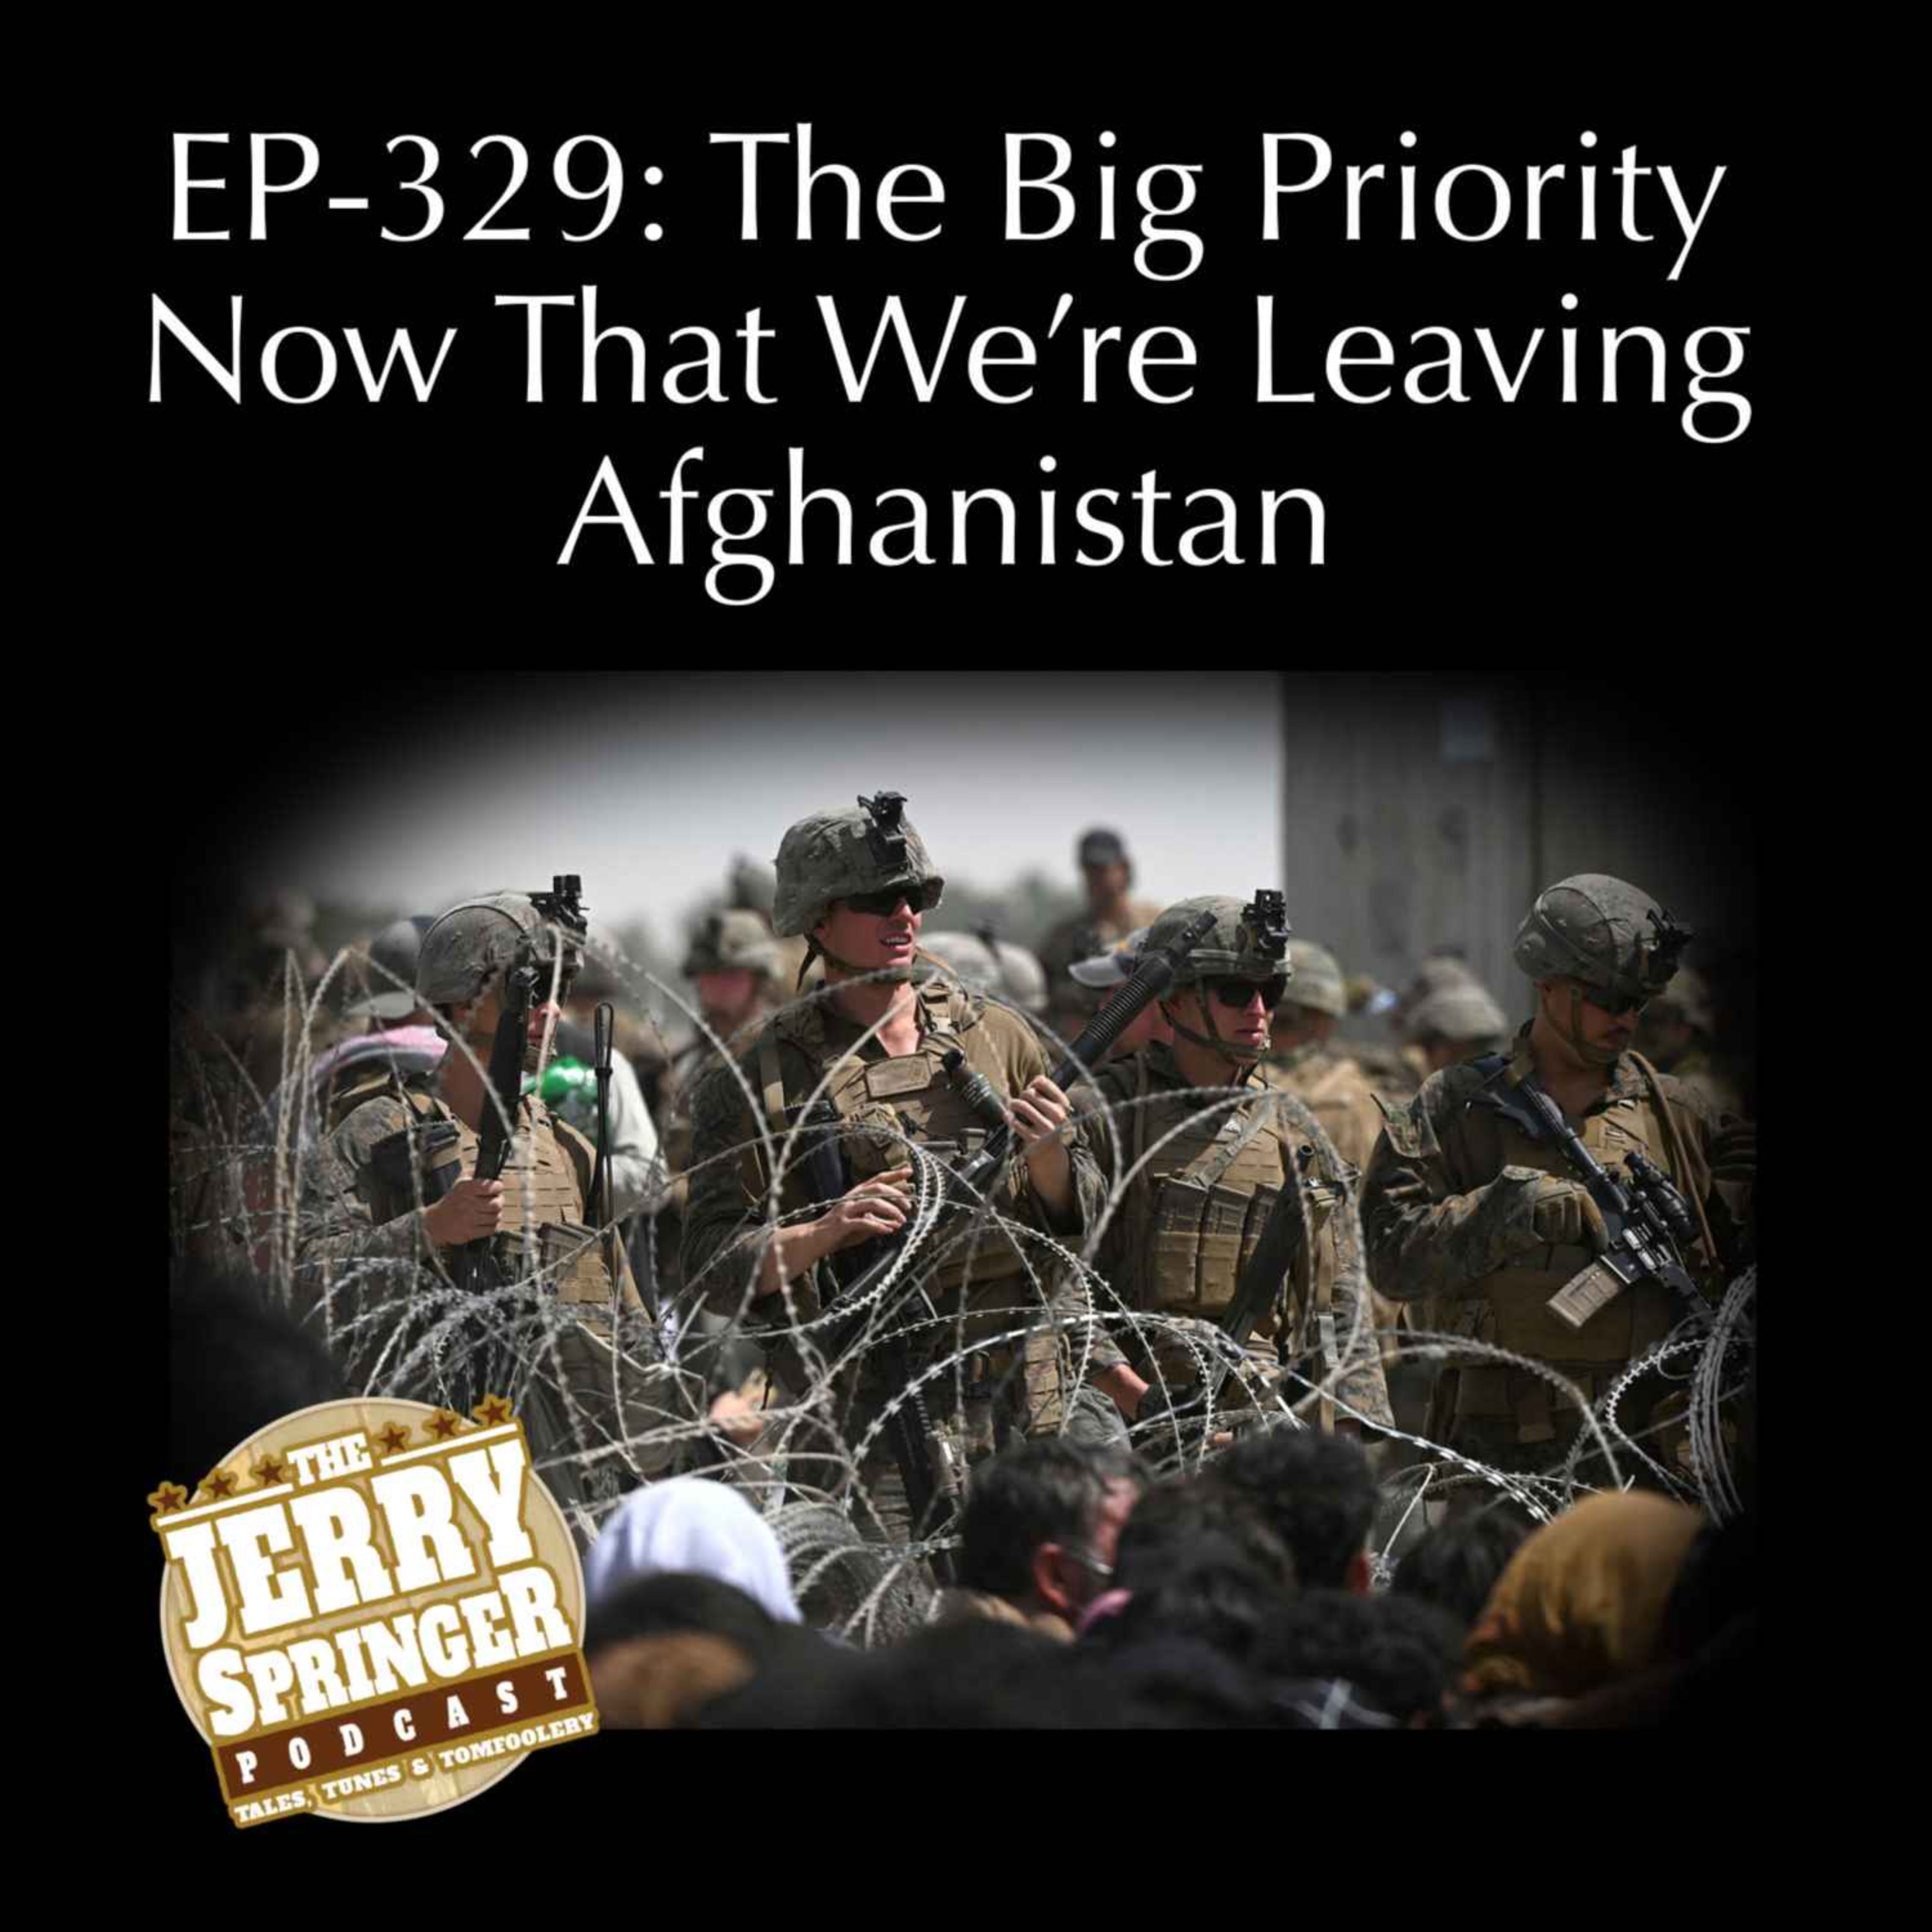 The Big Priority Now That We're Leaving Afghanistan: EP-329